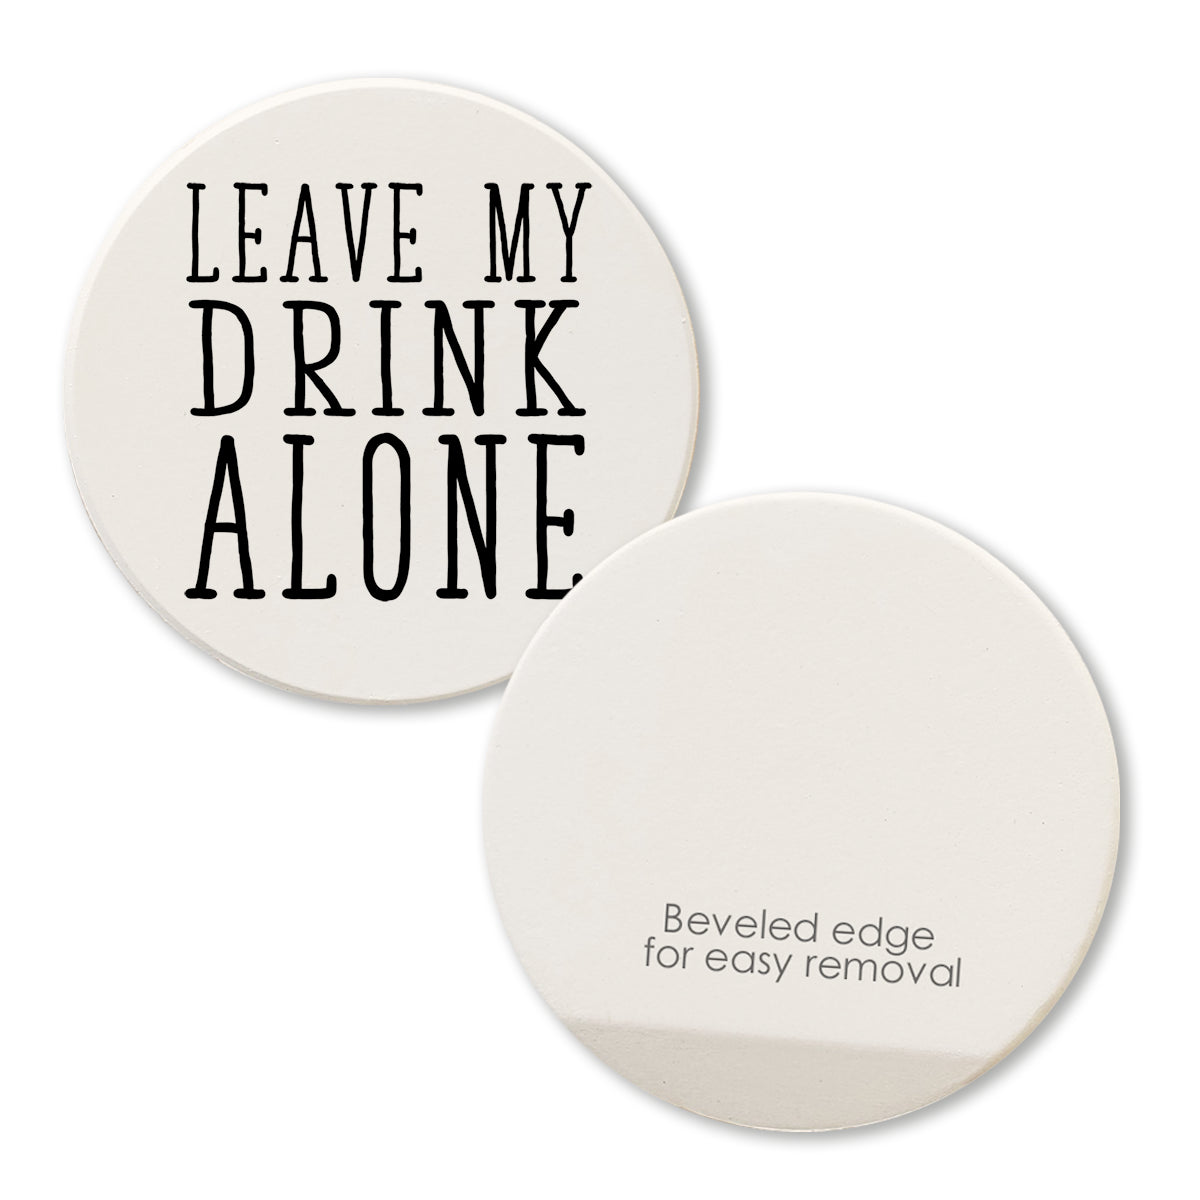 "Leave My Drink Alone" Round Car Coaster